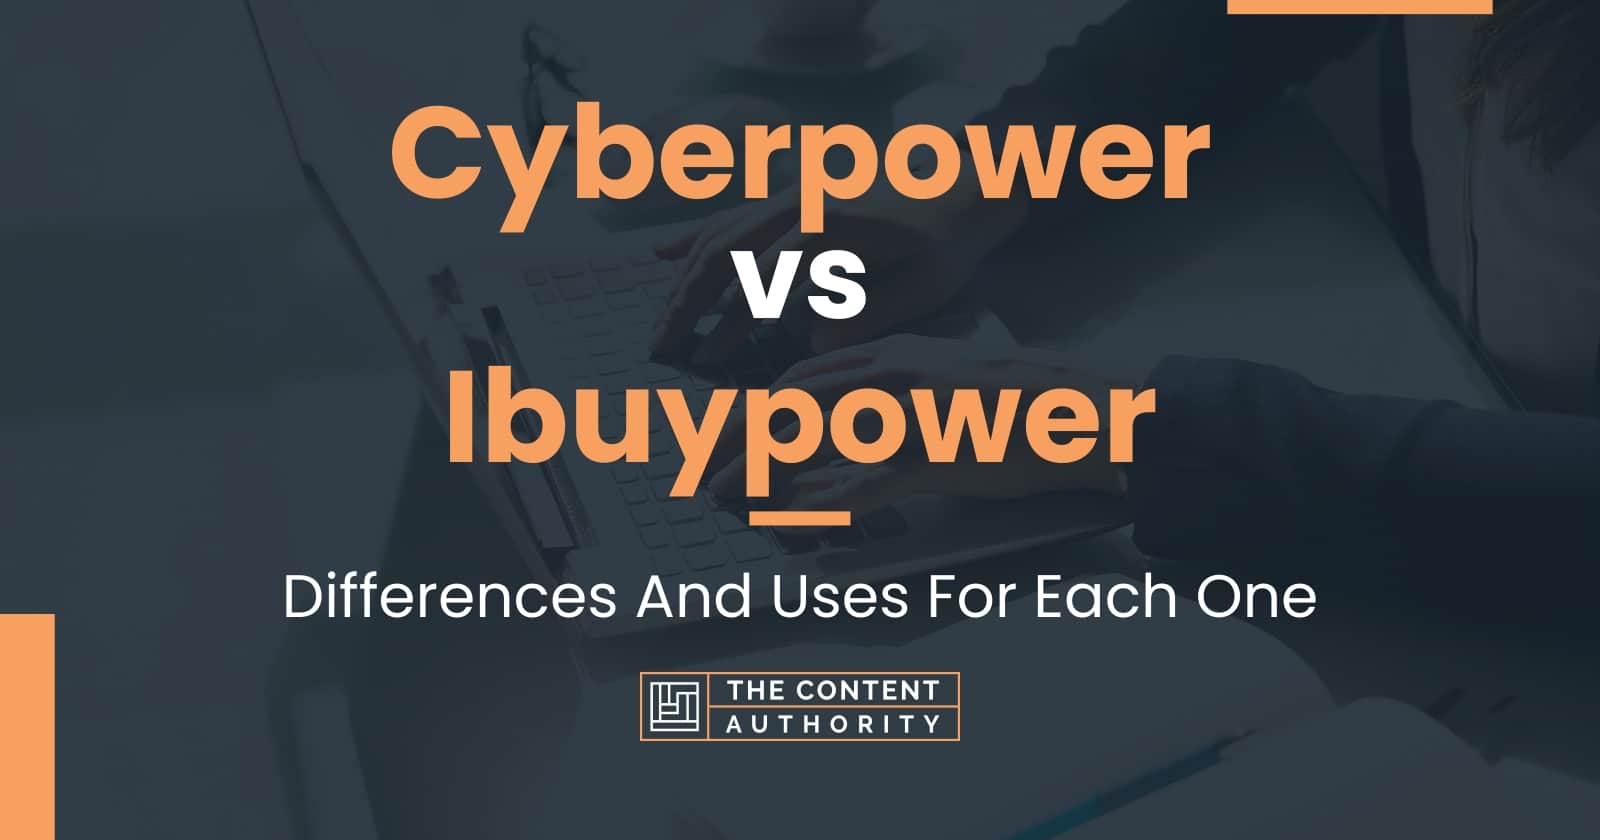 Cyberpower vs Ibuypower Differences And Uses For Each One